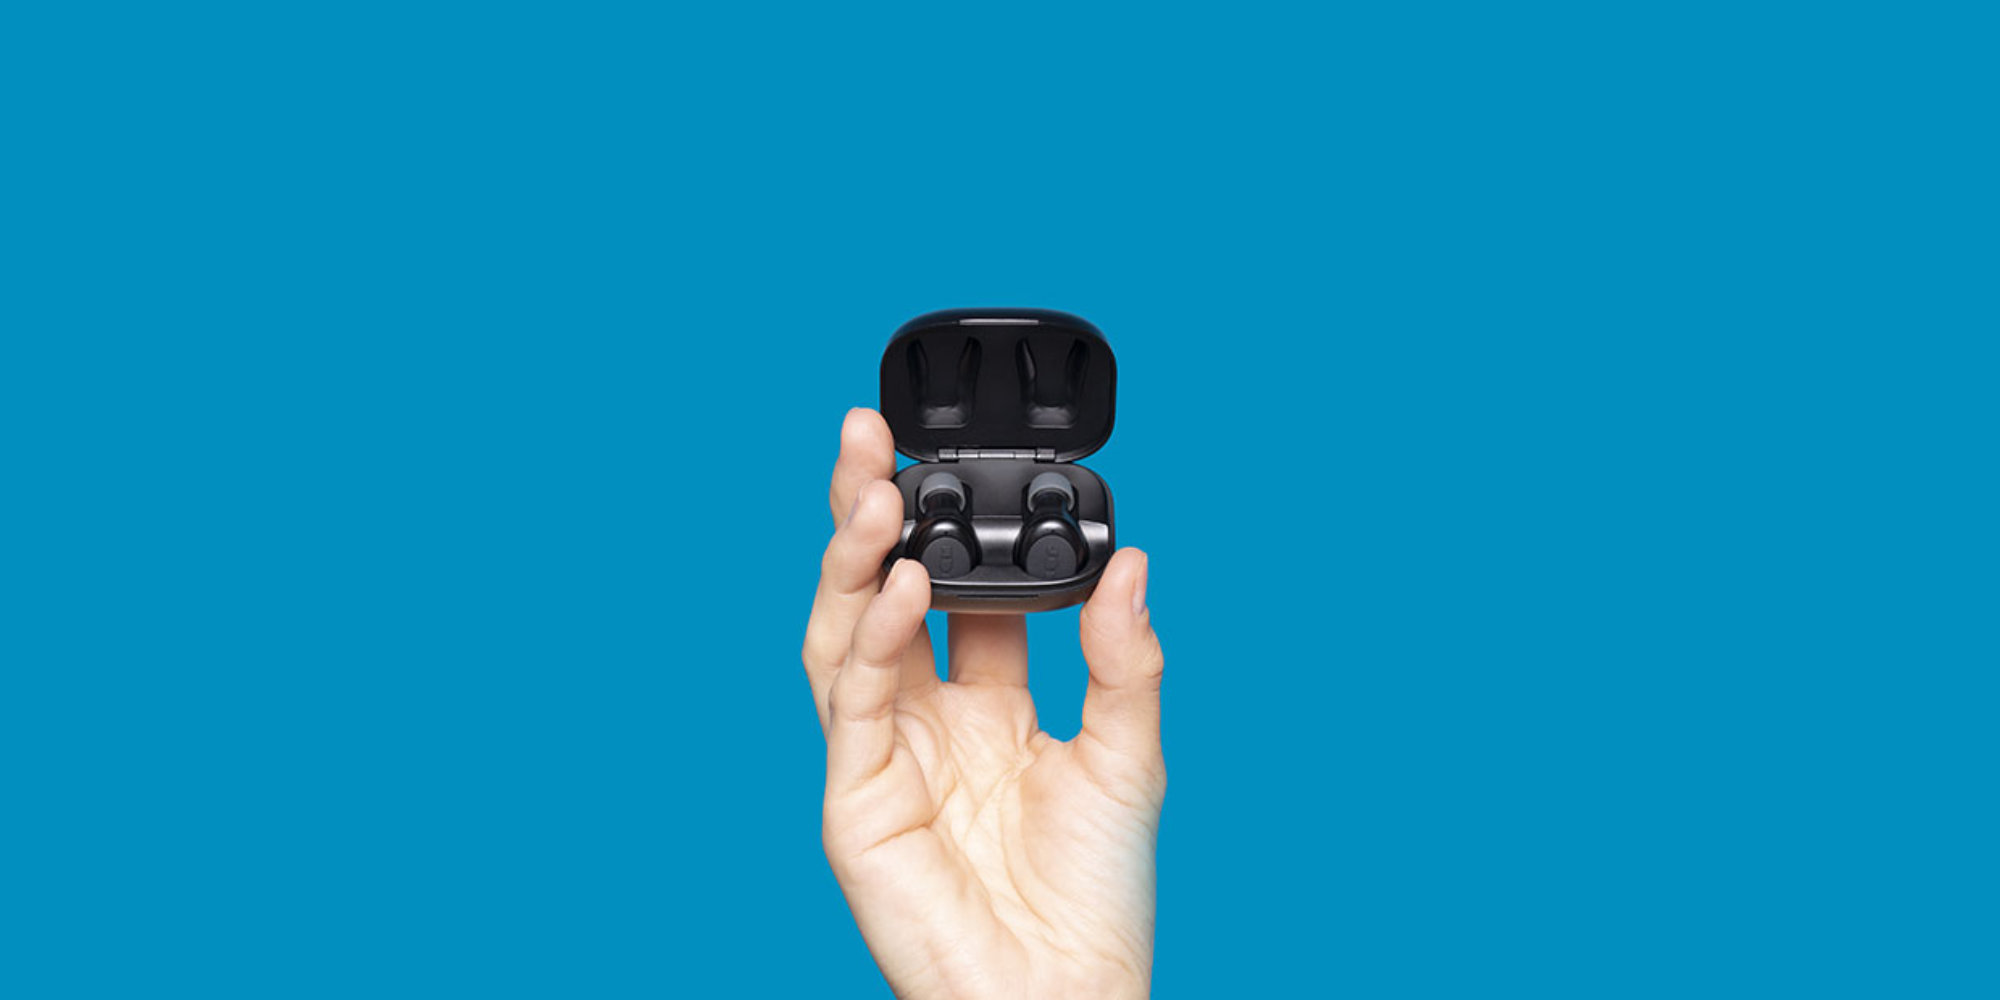 JAM delivers cheap AirPods competitor with $40 price tag - 9to5Toys